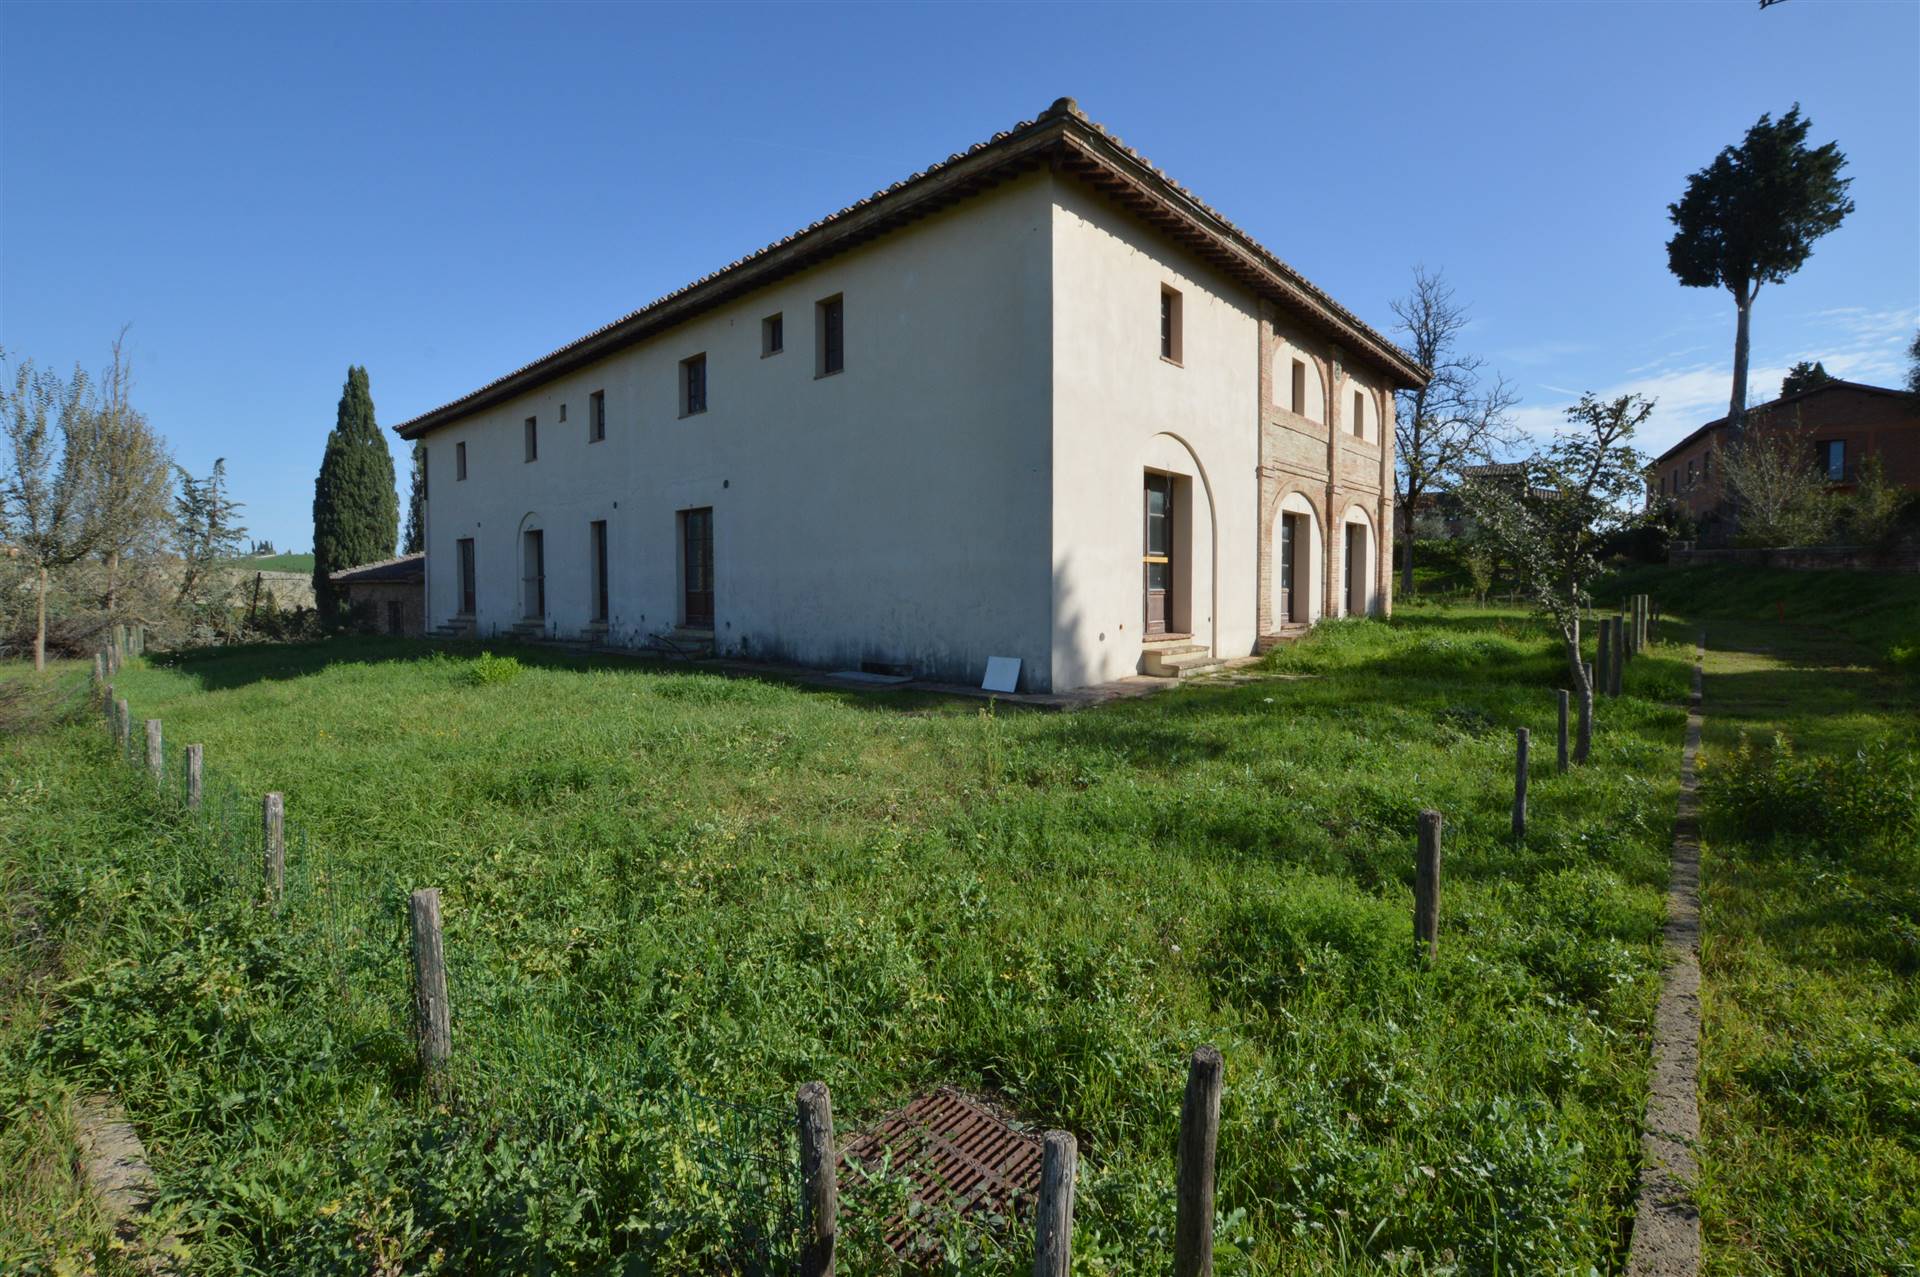 ISOLA D'ARBIA, SIENA, Apartment for sale of 95 Sq. mt., Restored, Heating Individual heating system, Energetic class: E, placed at Ground on 2, composed by: 4 Rooms, Kitchenette, , 2 Bedrooms, 2 